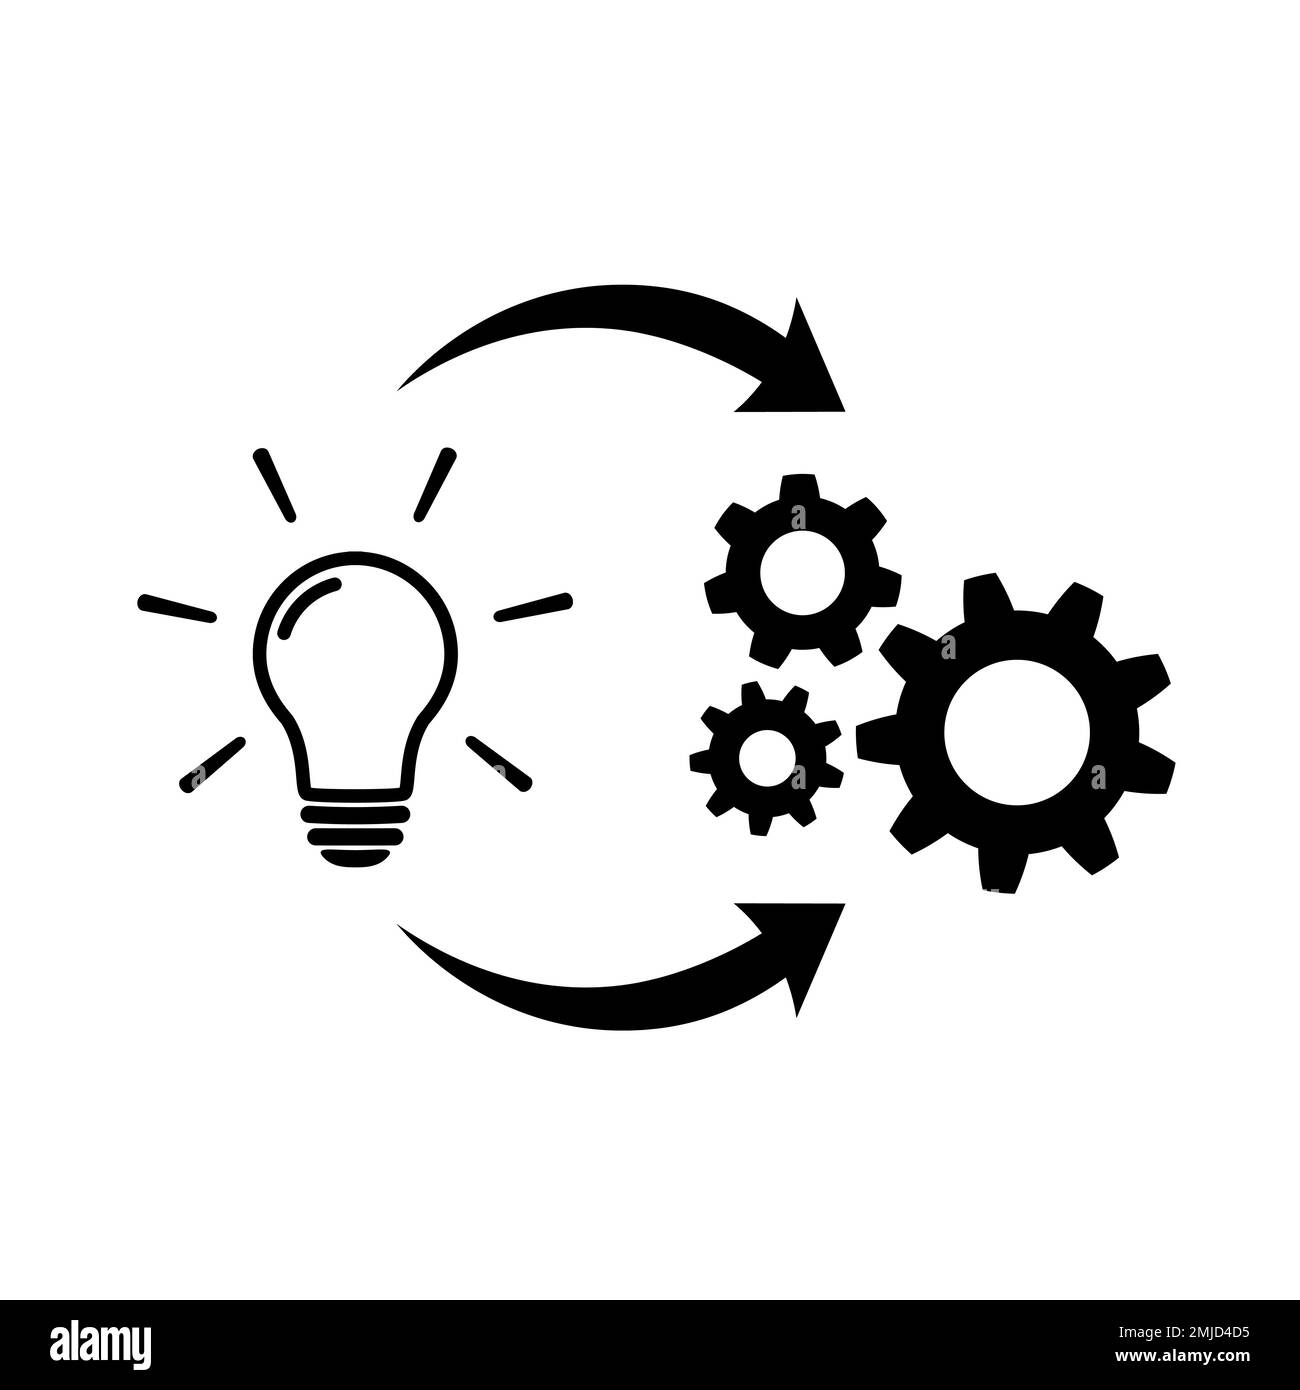 Light bulb with gear and circulating arrows icon Stock Vector